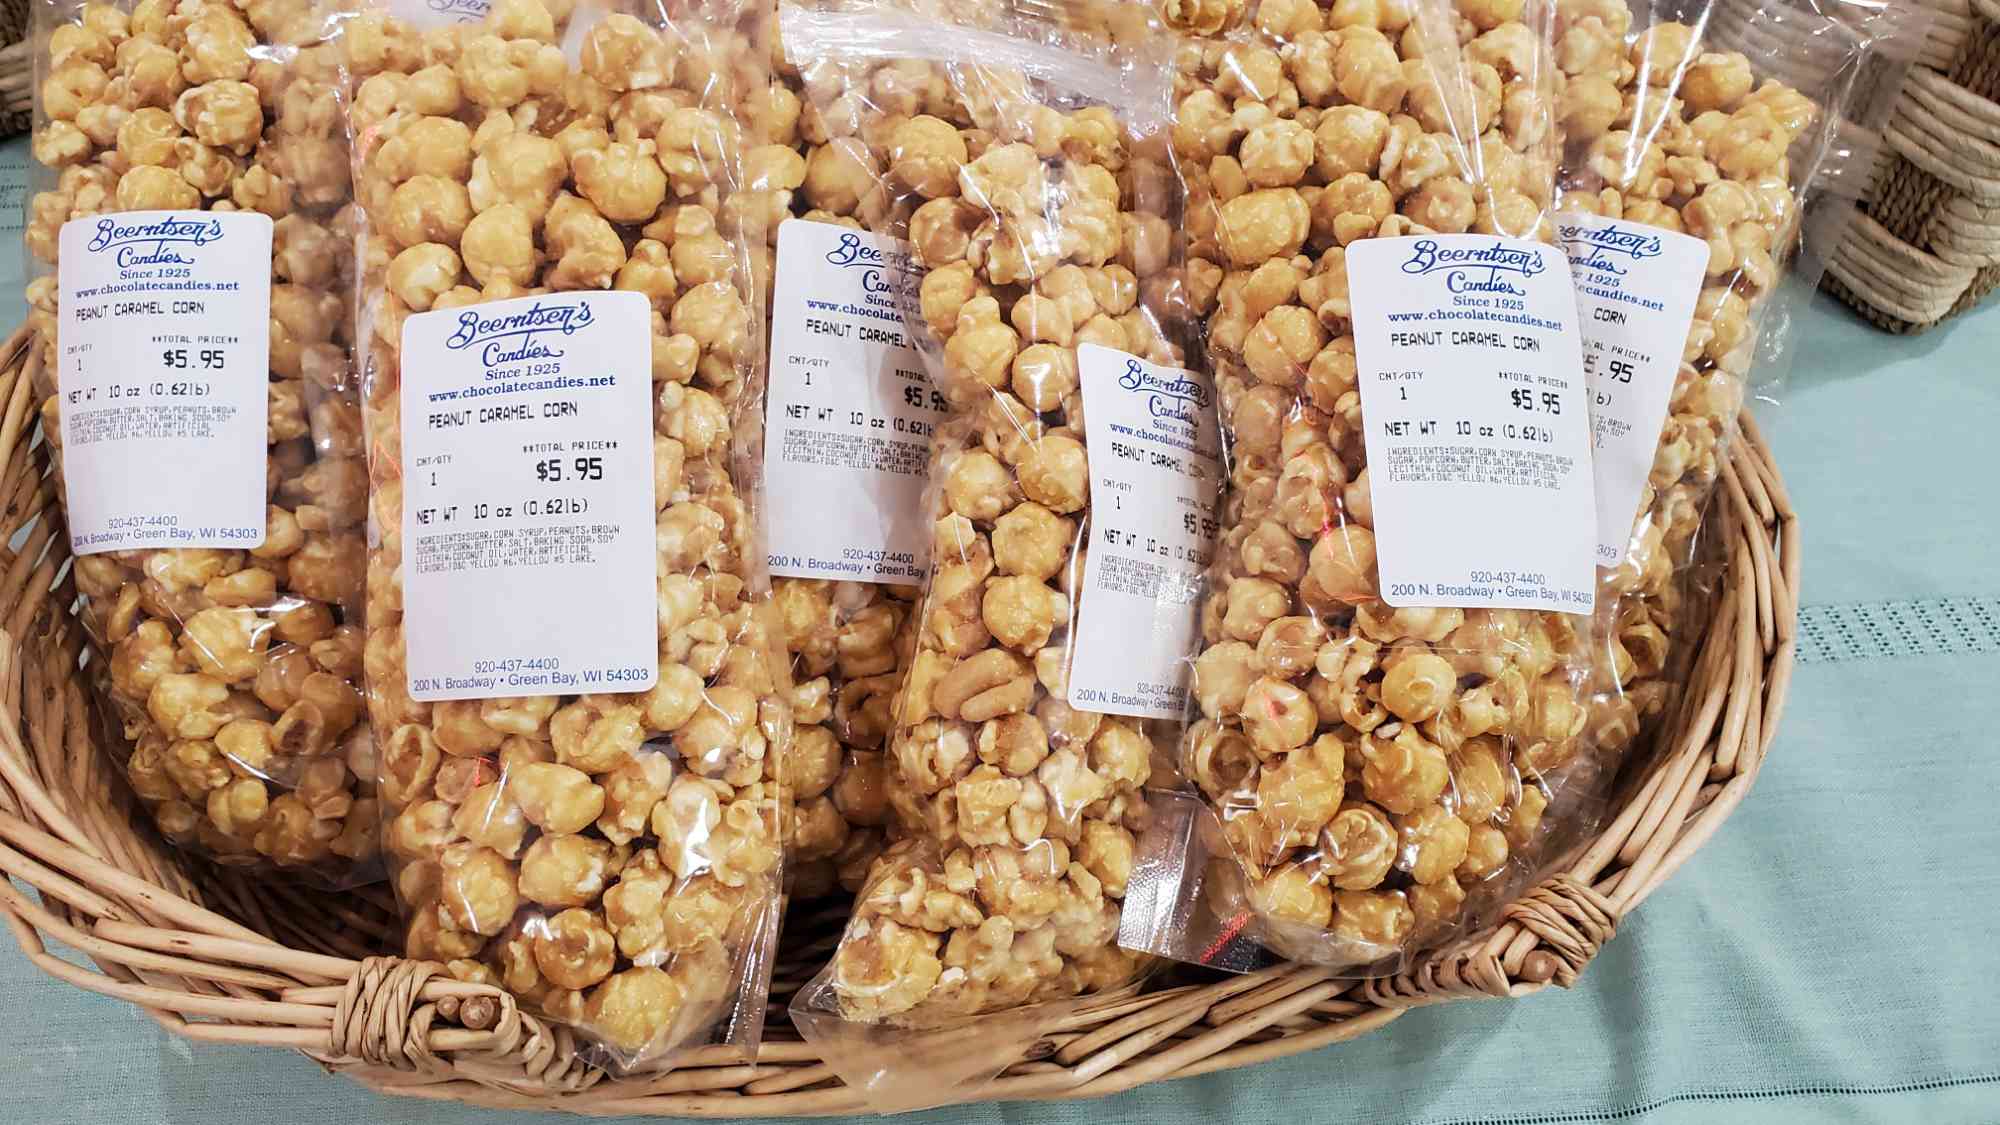 Packages of carmel corn